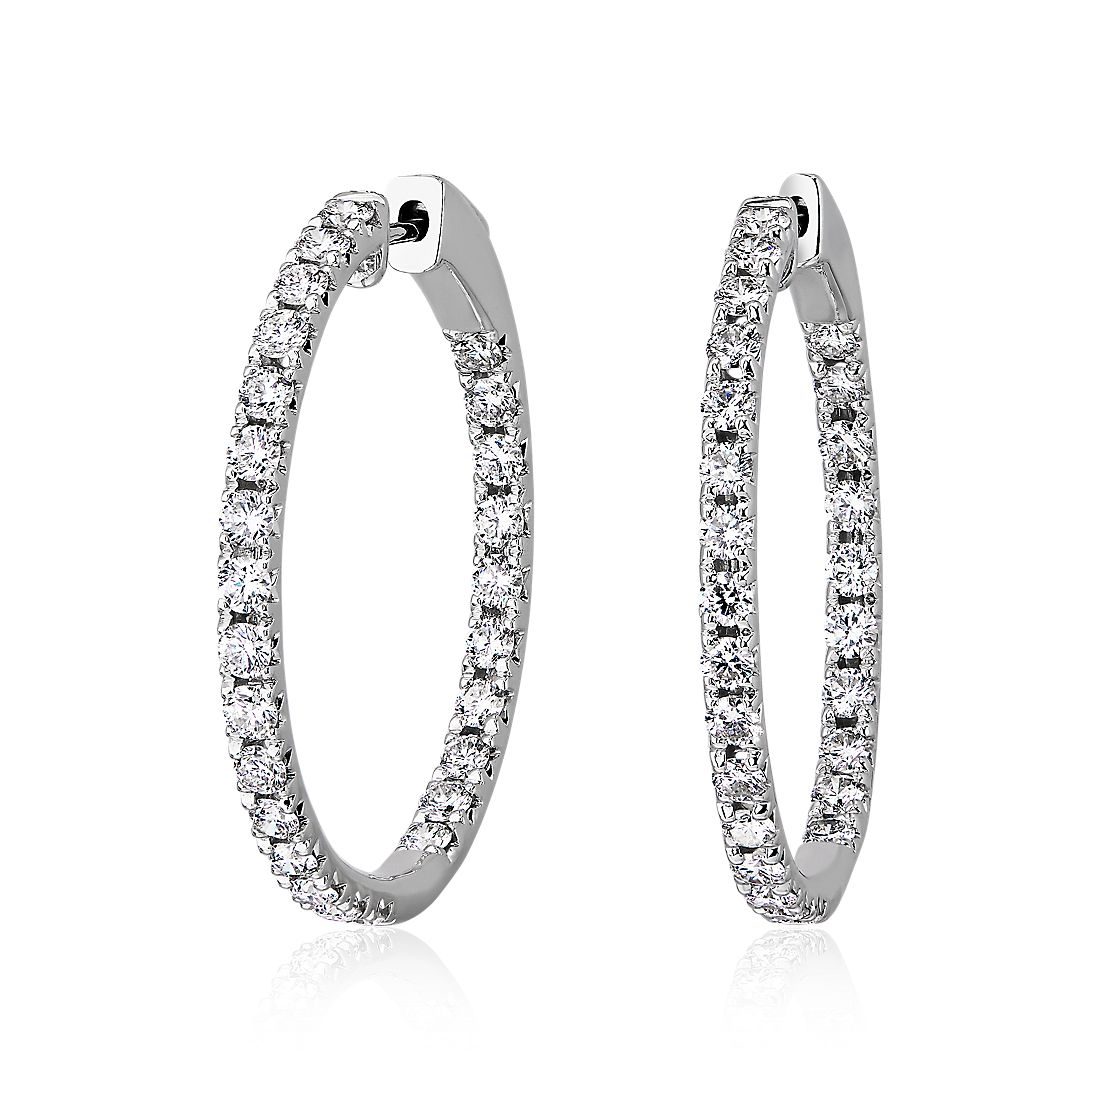 Eternity French Pavé Round Hoop Earrings in 14k White Gold (2 ct. tw.)